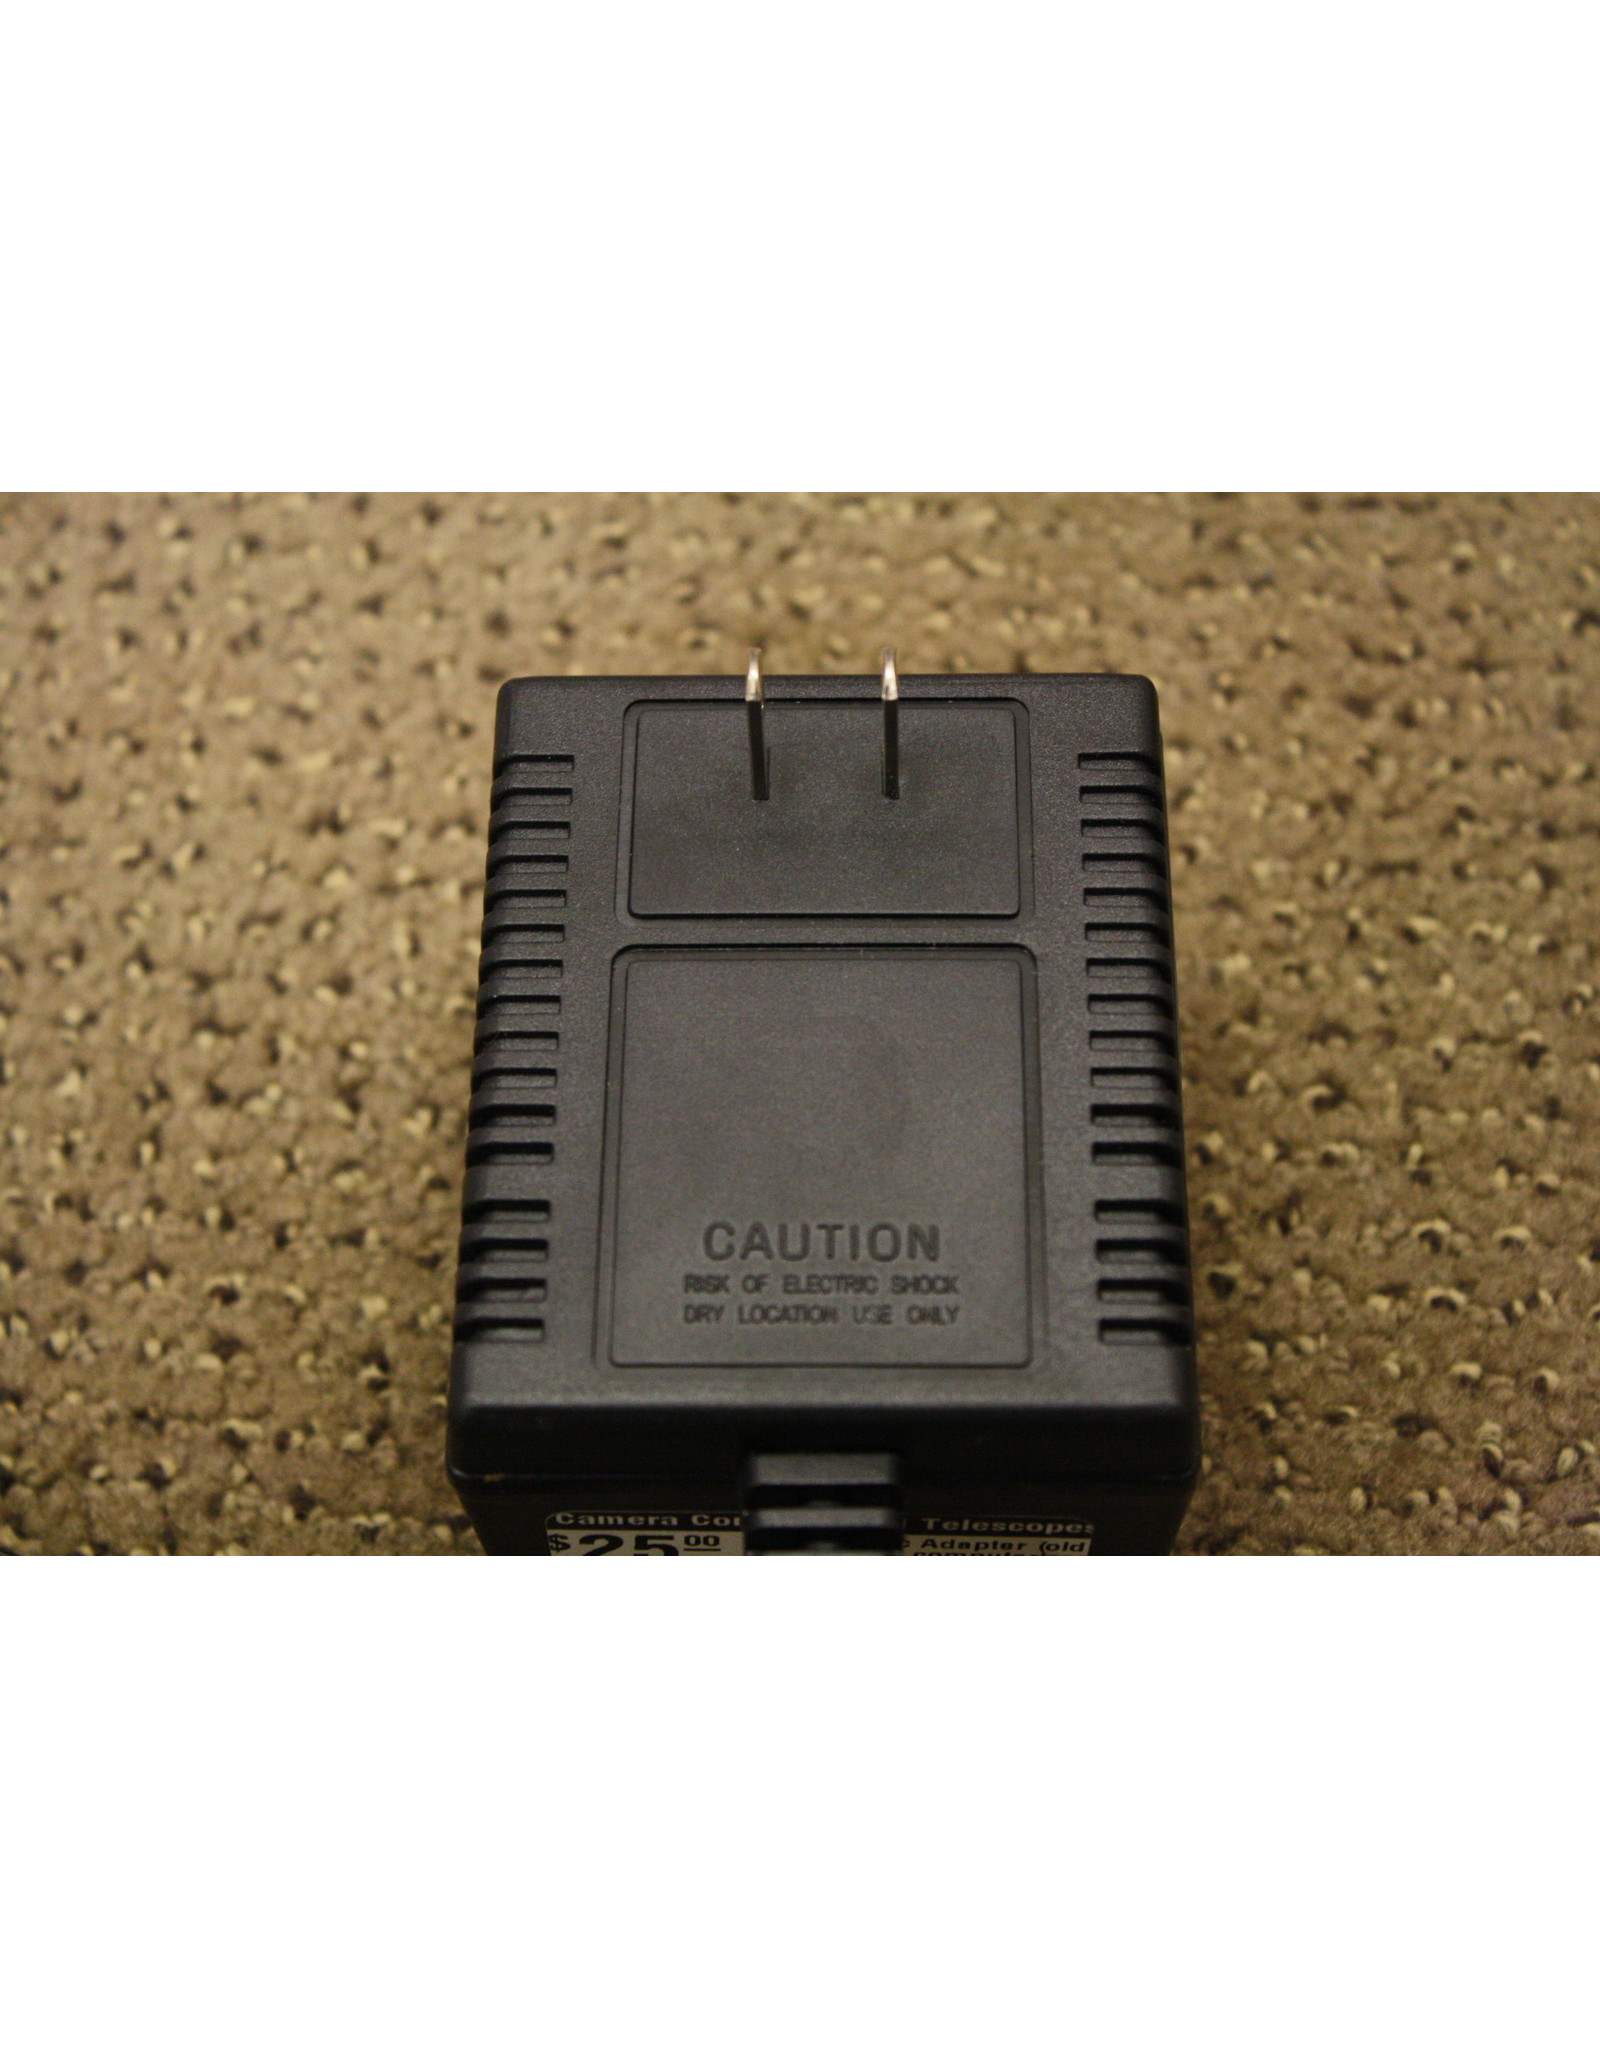 Celestron Ac Adapter (old Style) for all computerized scopes (except CGE Pro)